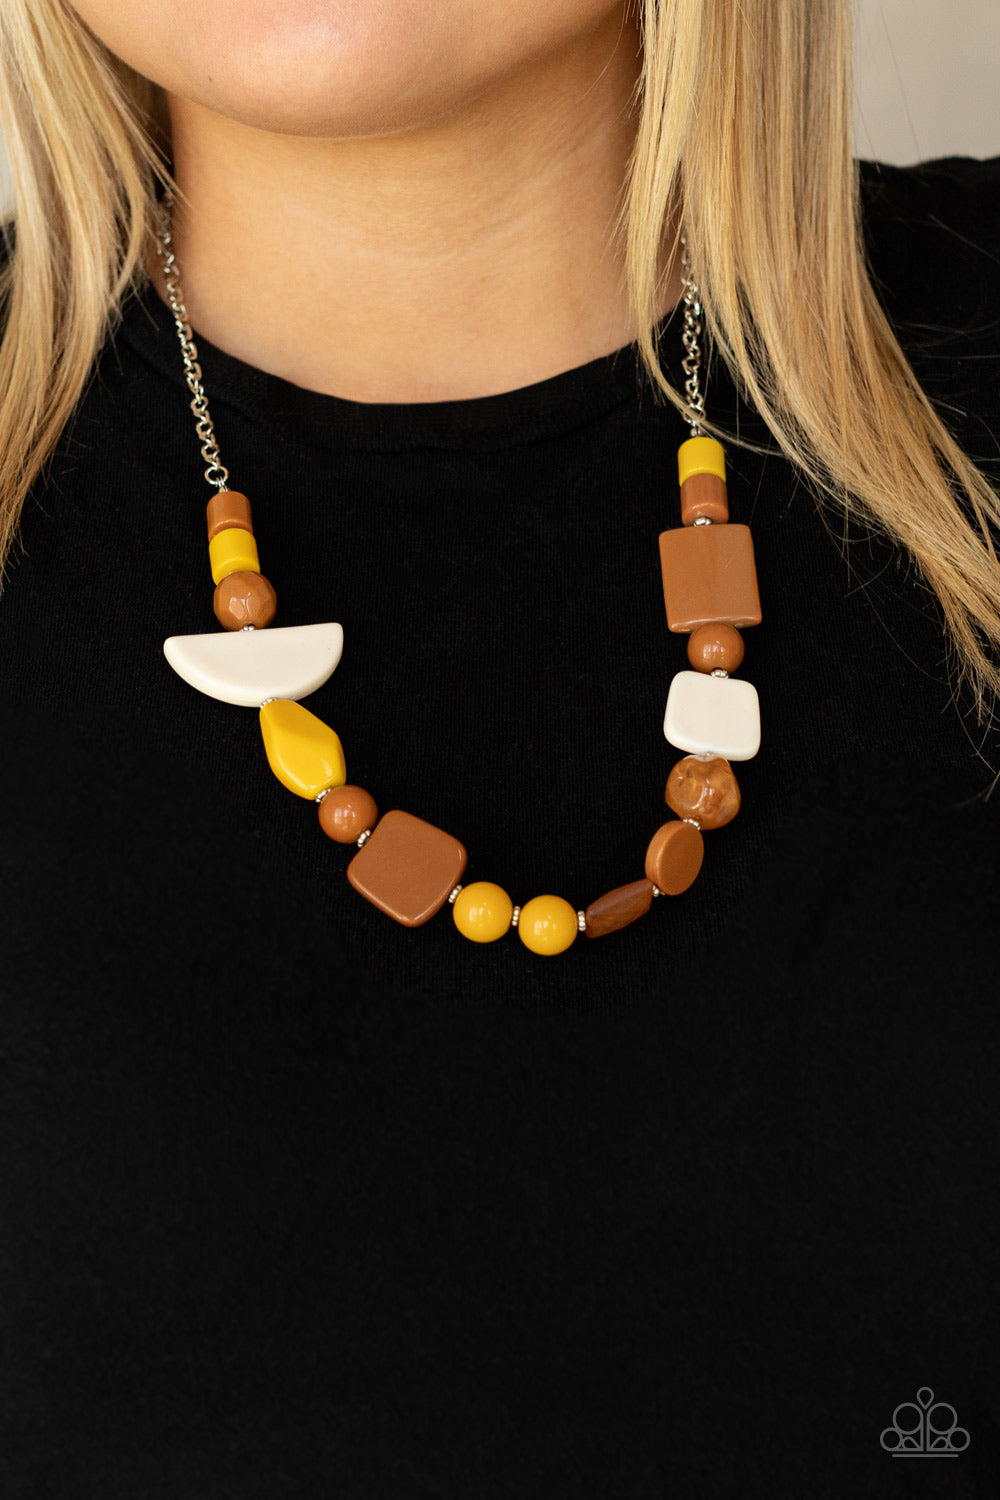 Paparazzi Accessories Tranquil Trendsetter - Yellow Acrylic Necklaces featuring the rustic hues of Adobe, Mustard, and Soybean, mismatched acrylic and faux rock beads are haphazardly threaded along an invisible wire below the collar for an abstract artisan vibe. Features an adjustable clasp closure.